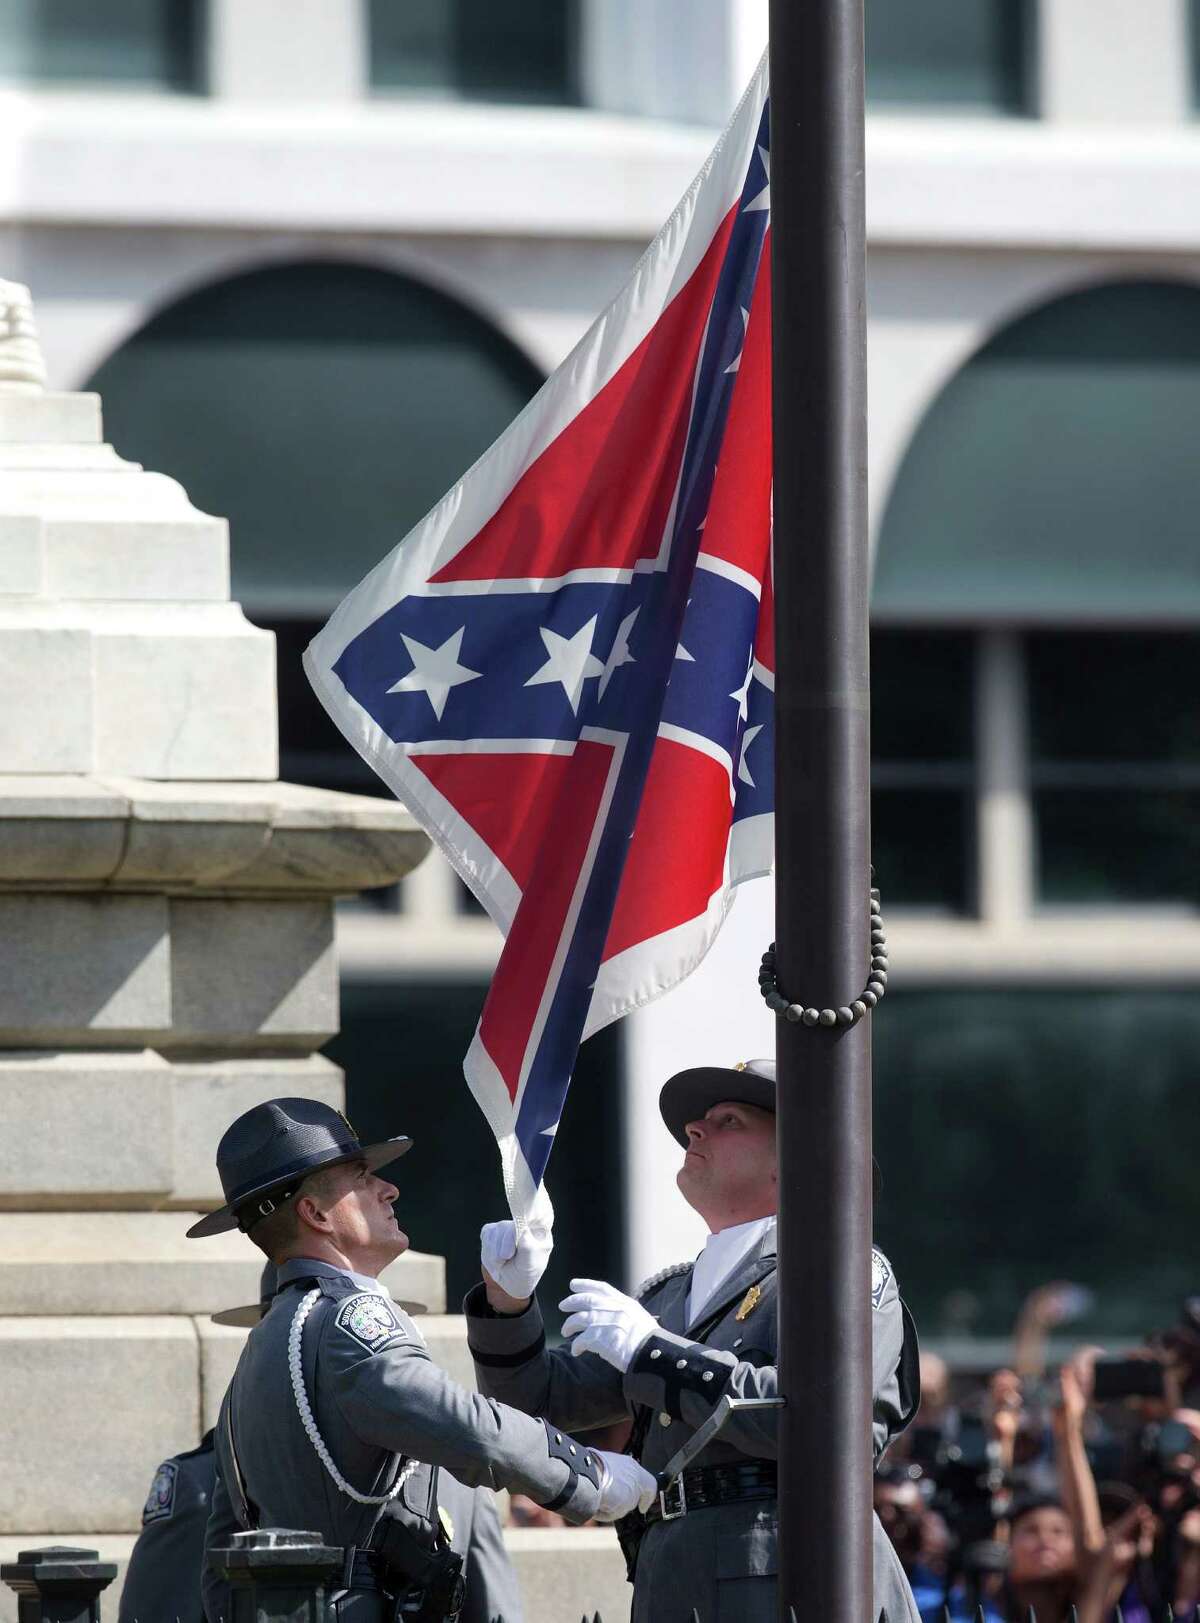 An honor guard from the South Carolina Highway patrol removes the Confederate battle flag from the Capitol grounds in Columbia, S.C., ending its 54-year presence there, on Friday, July 10, 2015. (AP Photo/John Bazemore)